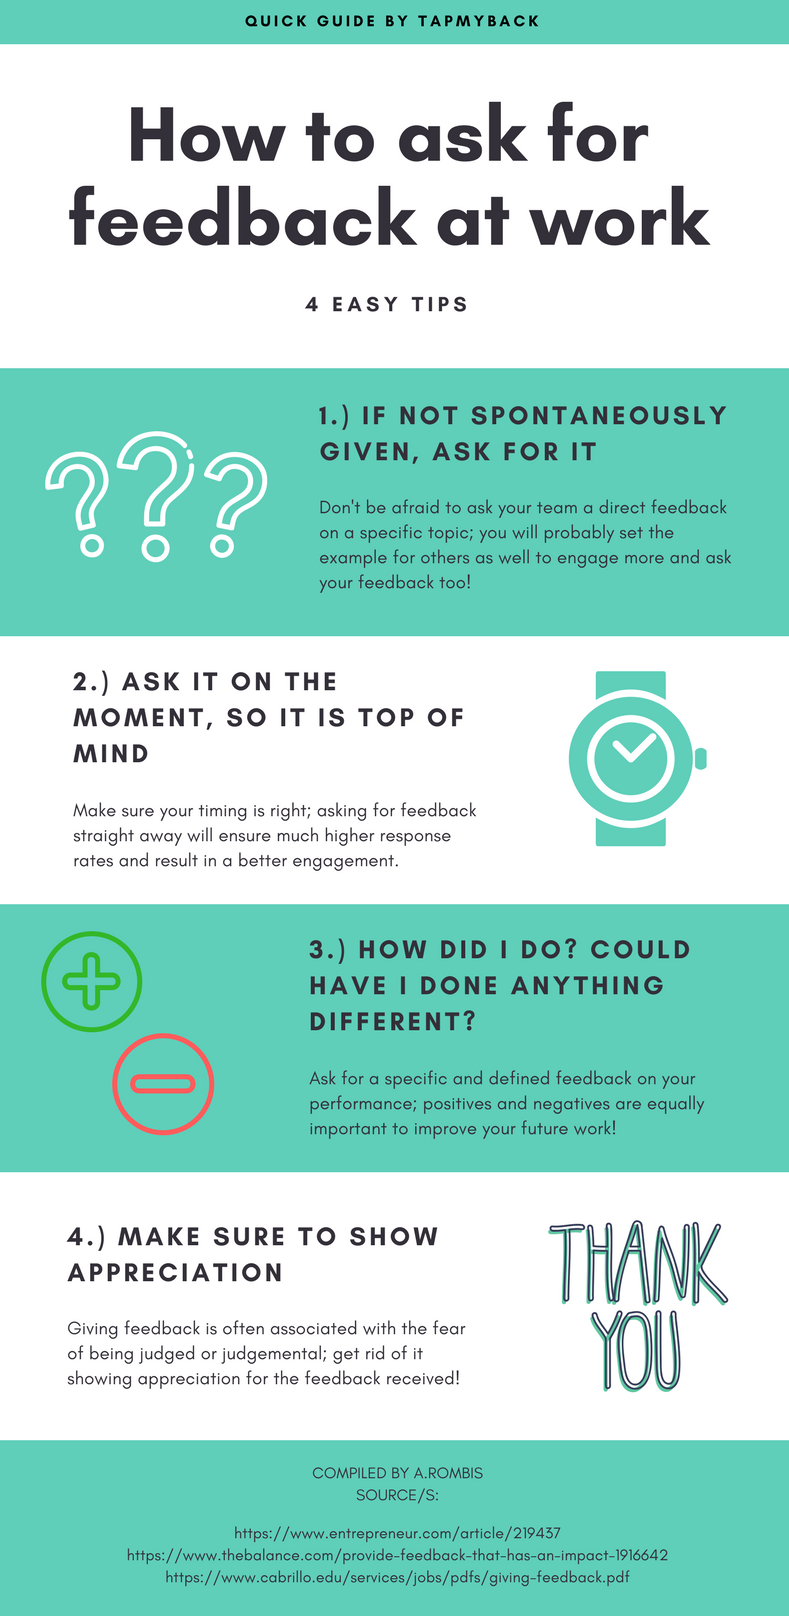 How to ask for feedback at work, 4 easy tips